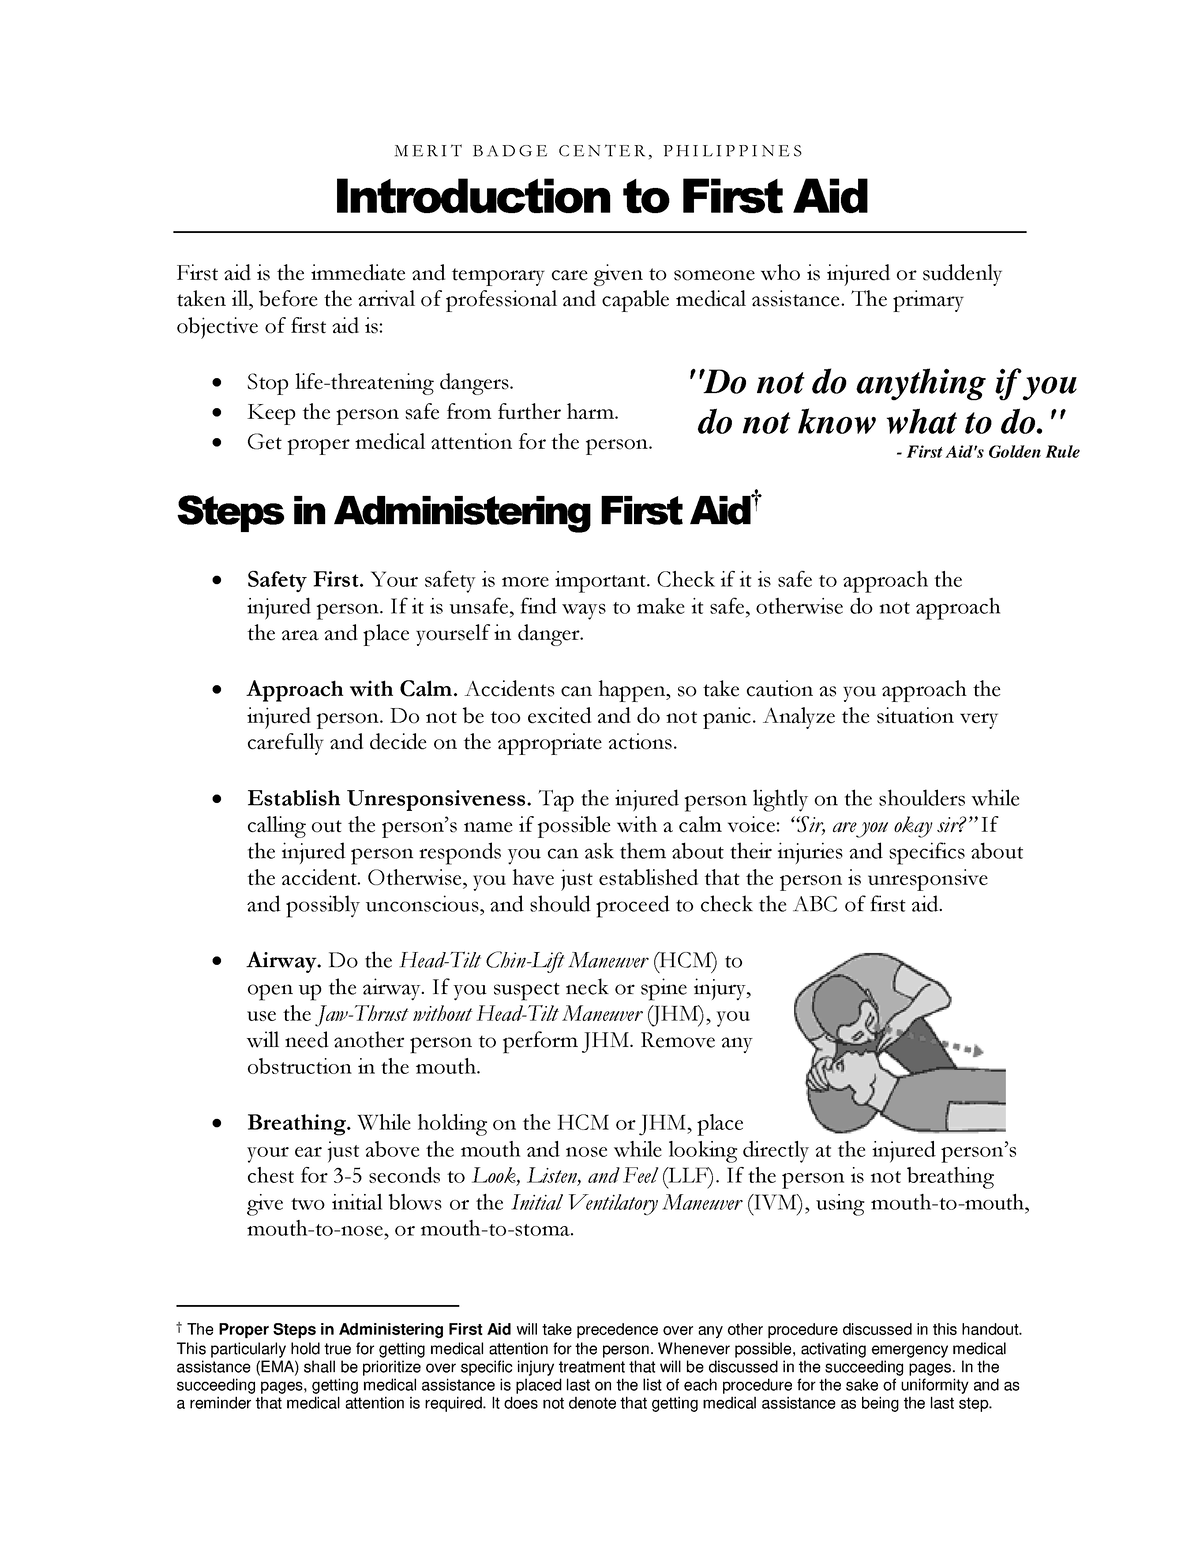 thesis about first aid